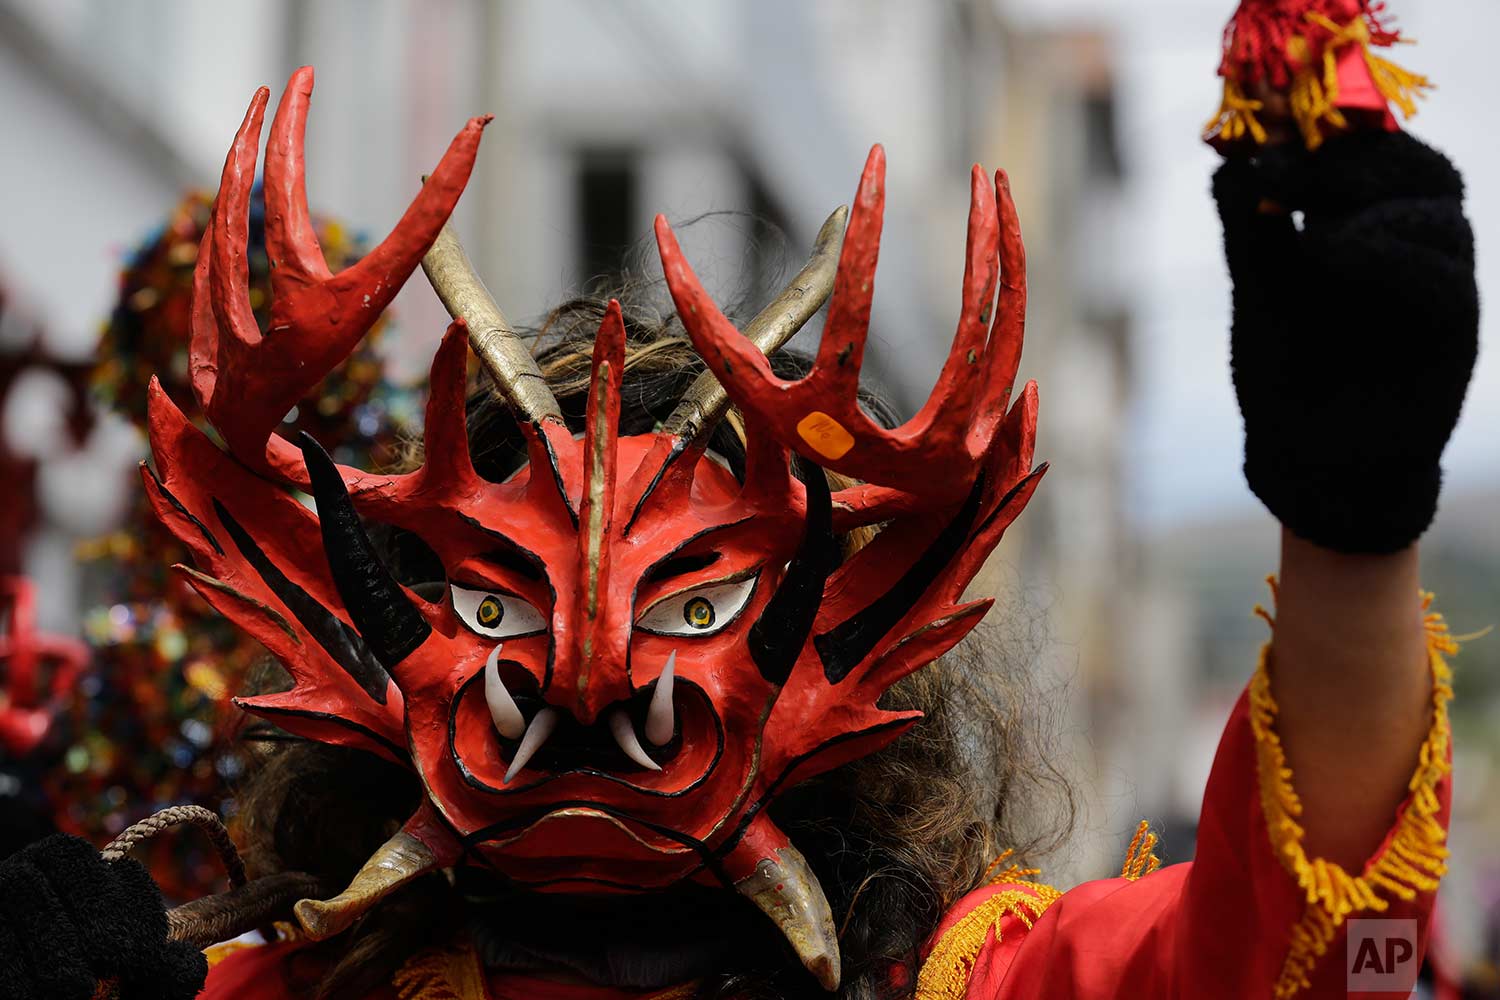  A man wearing a devil mask takes part in a parade as part of the traditional New Year's festival known as "La Diablada", in Pillaro, Ecuador, Friday, Jan. 5, 2018. (AP Photo/Dolores Ochoa) 